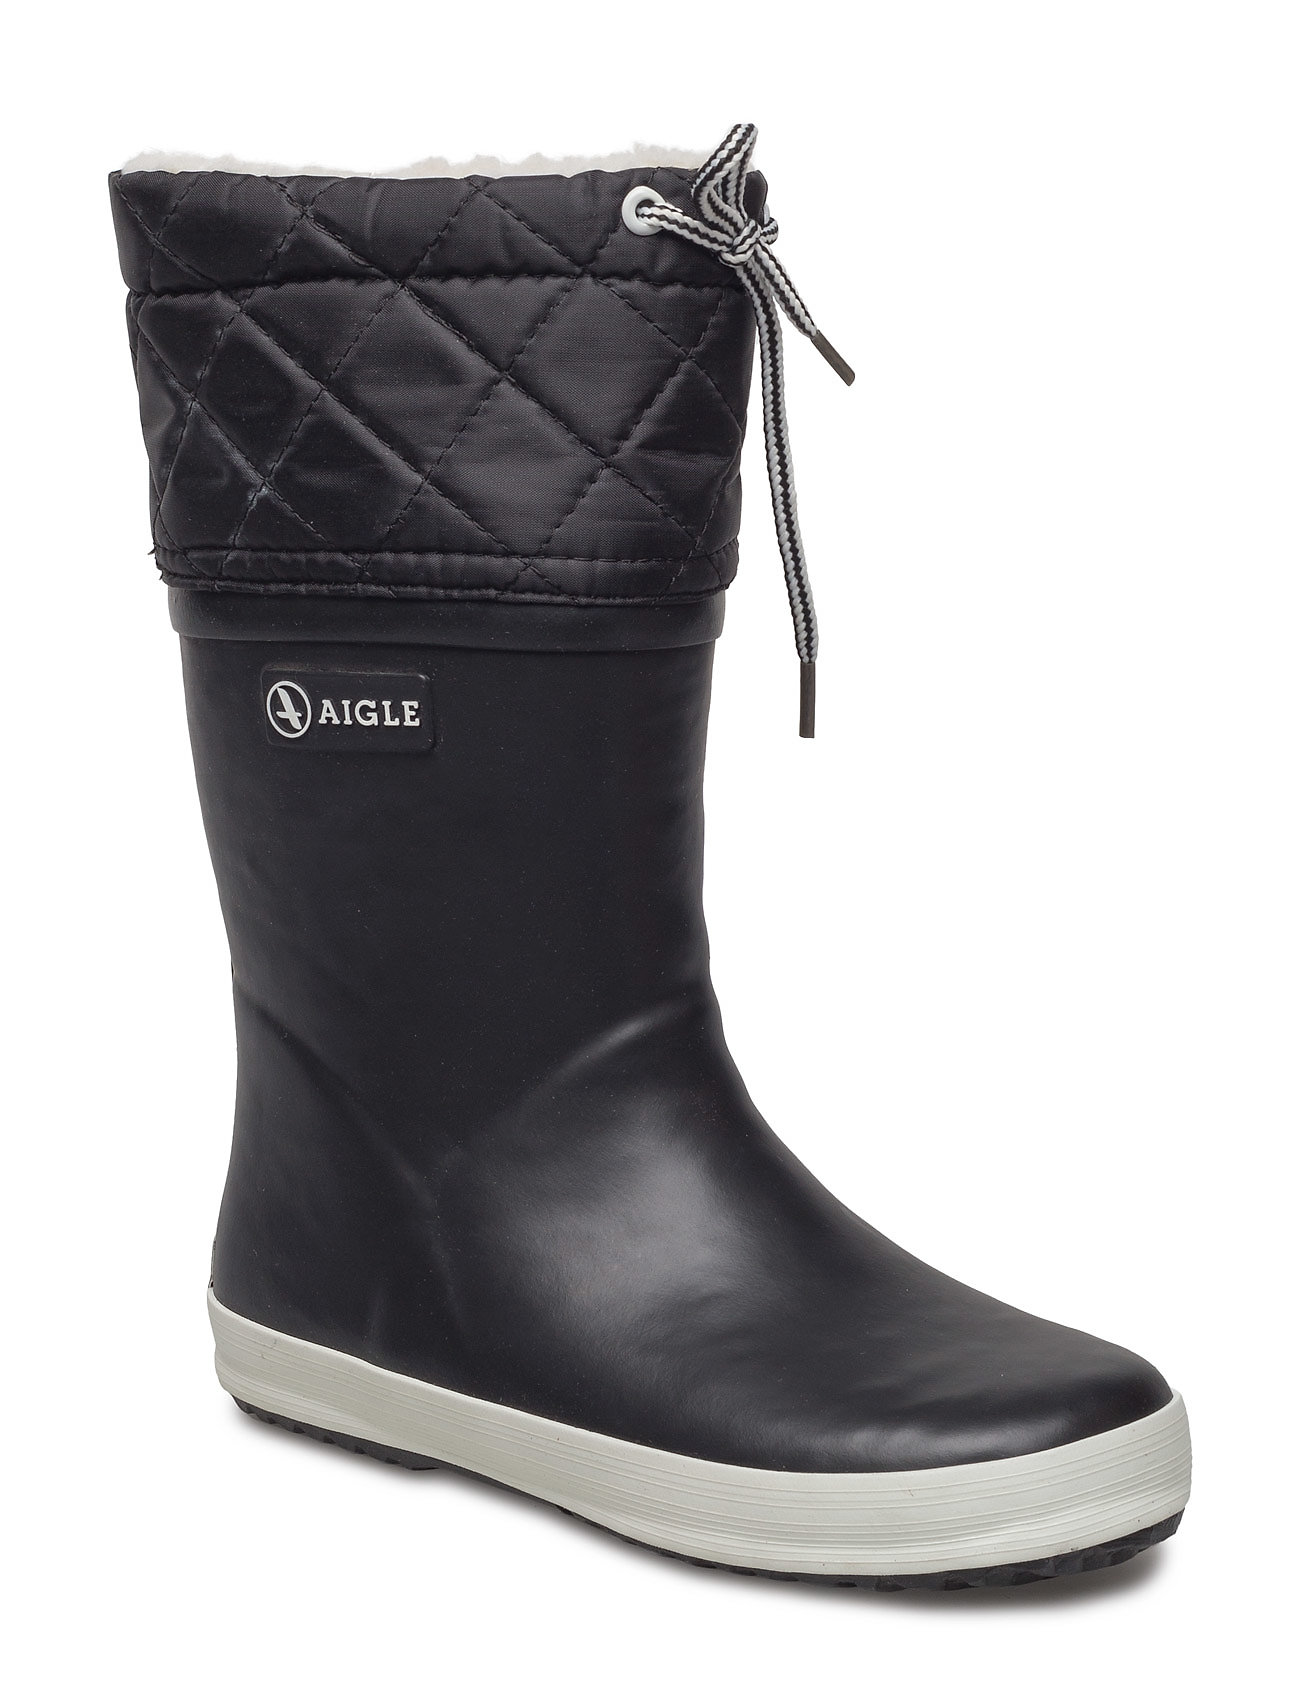 Ai Giboulee Noir/Blanc Shoes Rubberboots Lined Rubberboots Musta Aigle